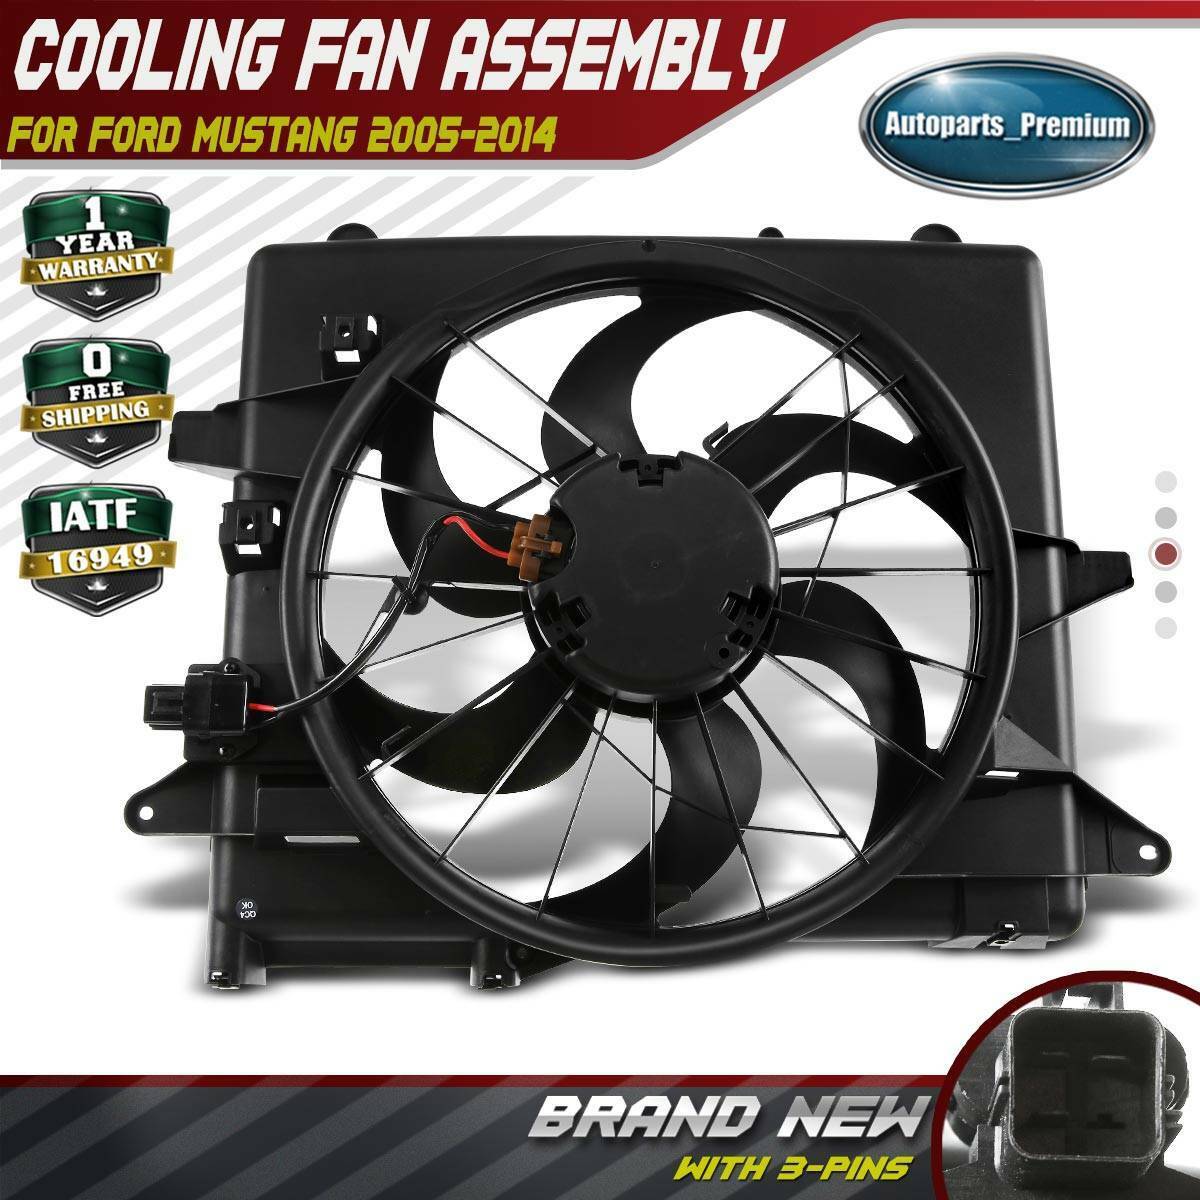 Engine Cooling Fan Radiator Fan Assembly w/ Resistor for Ford Mustang 2005-2014